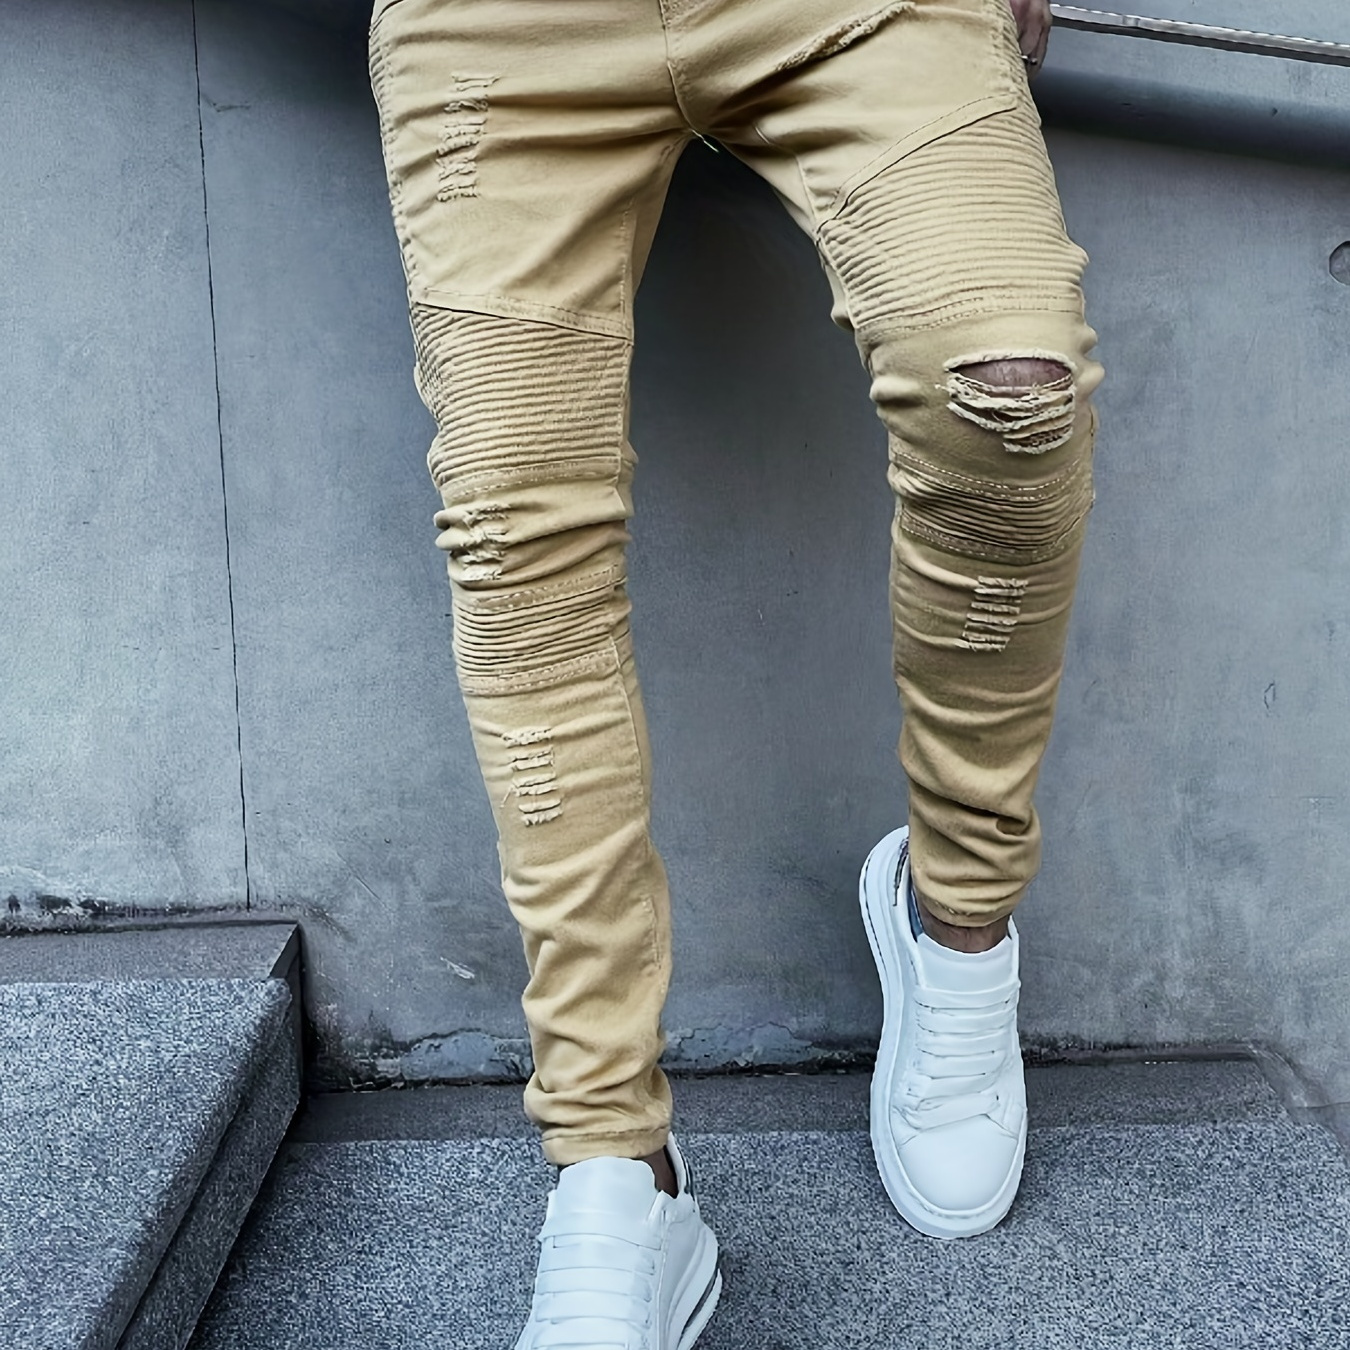 

Slim Fit Ripped Jeans, Men's Casual Street Style Distressed High Stretch Denim Pants For Spring Summer